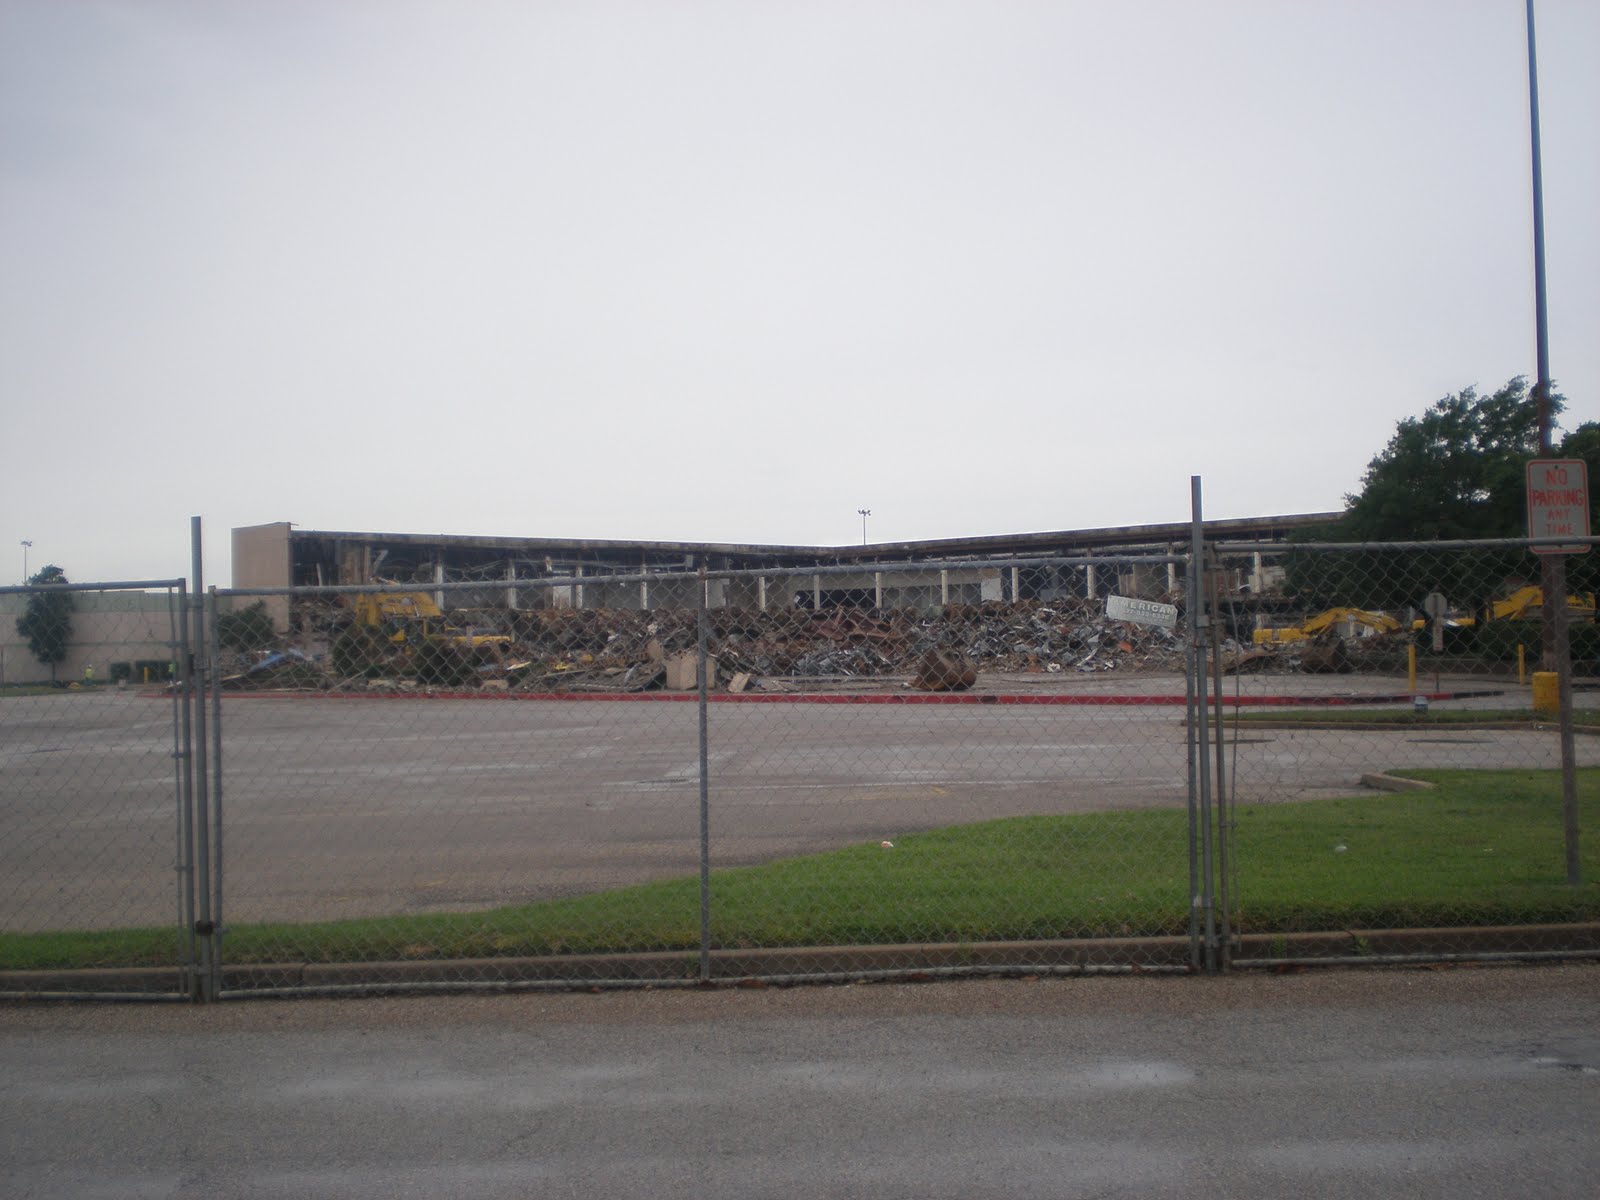 The Louisiana and Texas Retail Blogspot: May 16th Demolition pictures at Greenspoint Mall